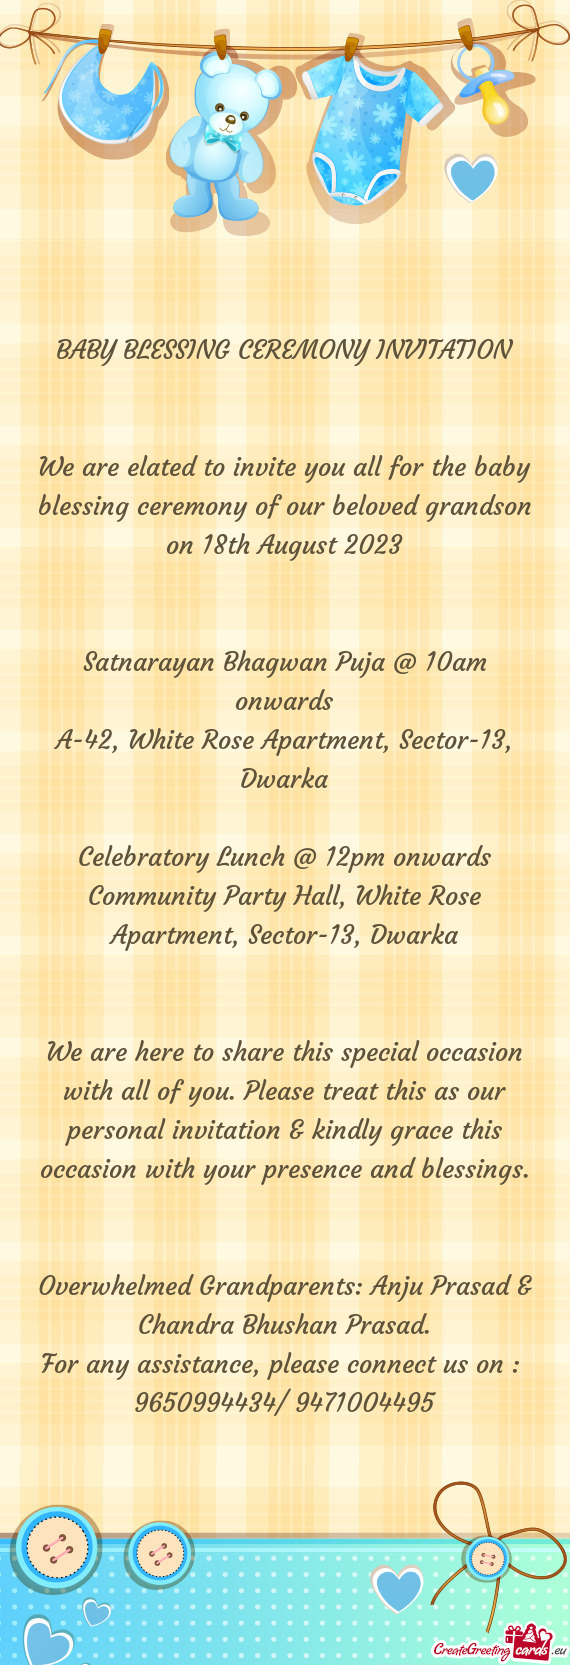 We are elated to invite you all for the baby blessing ceremony of our beloved grandson on 18th Augus